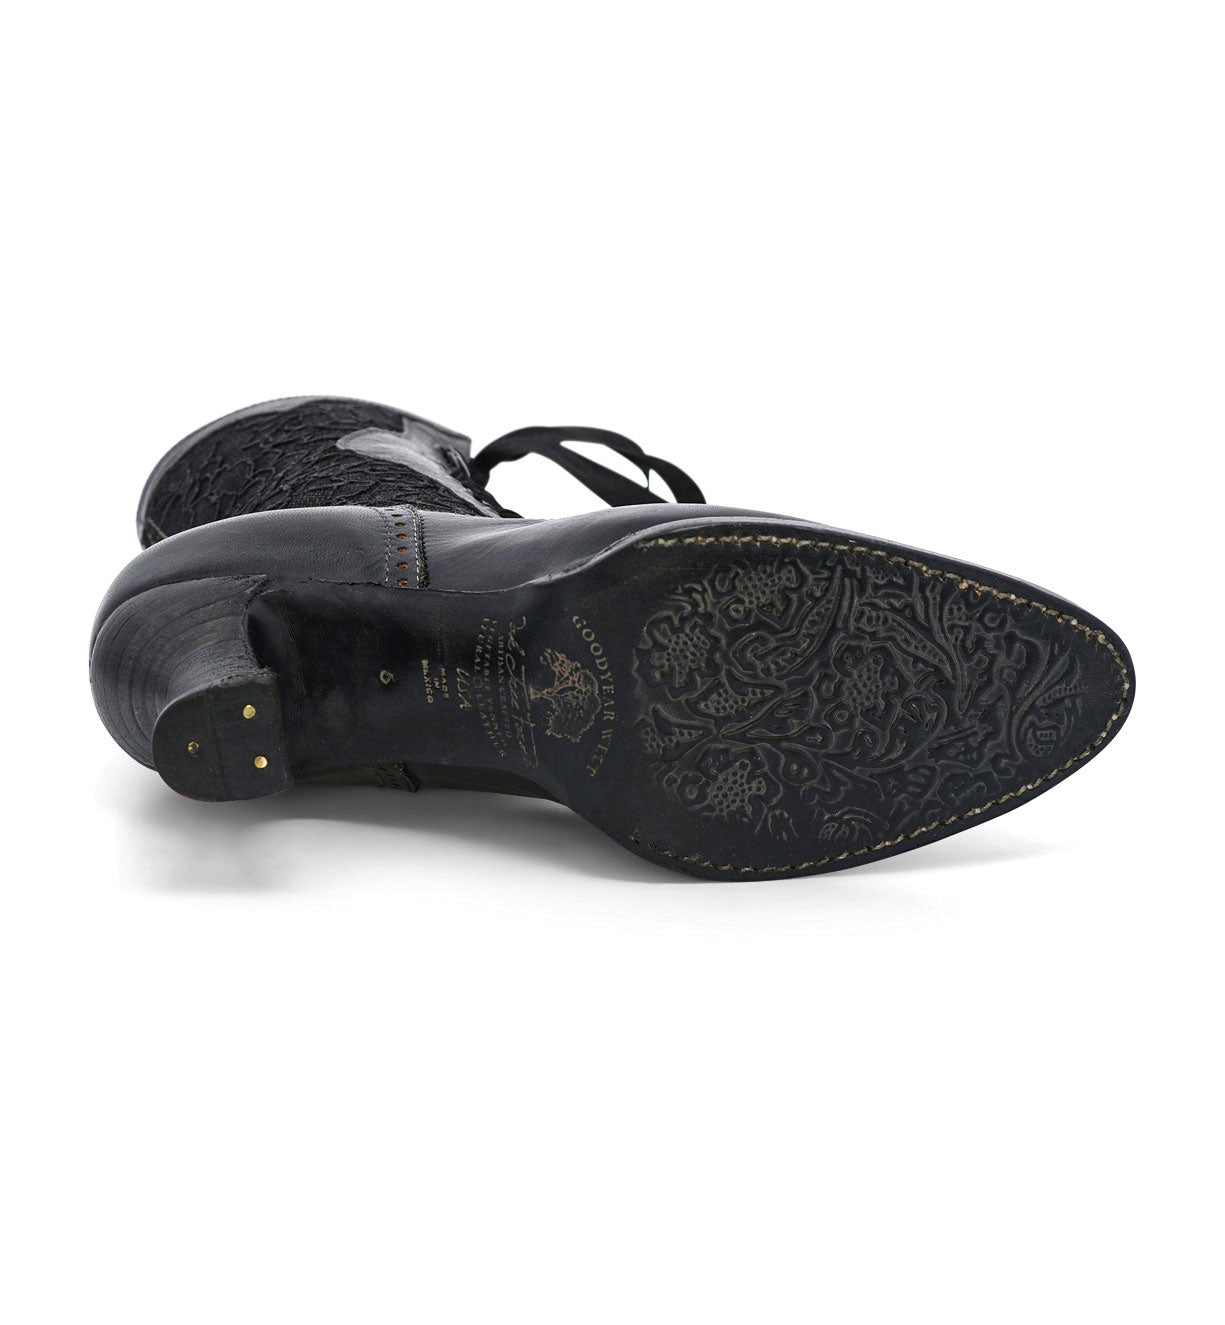 A pair of Oak Tree Farms Abigale hand crafted black lace shoes on a white background.